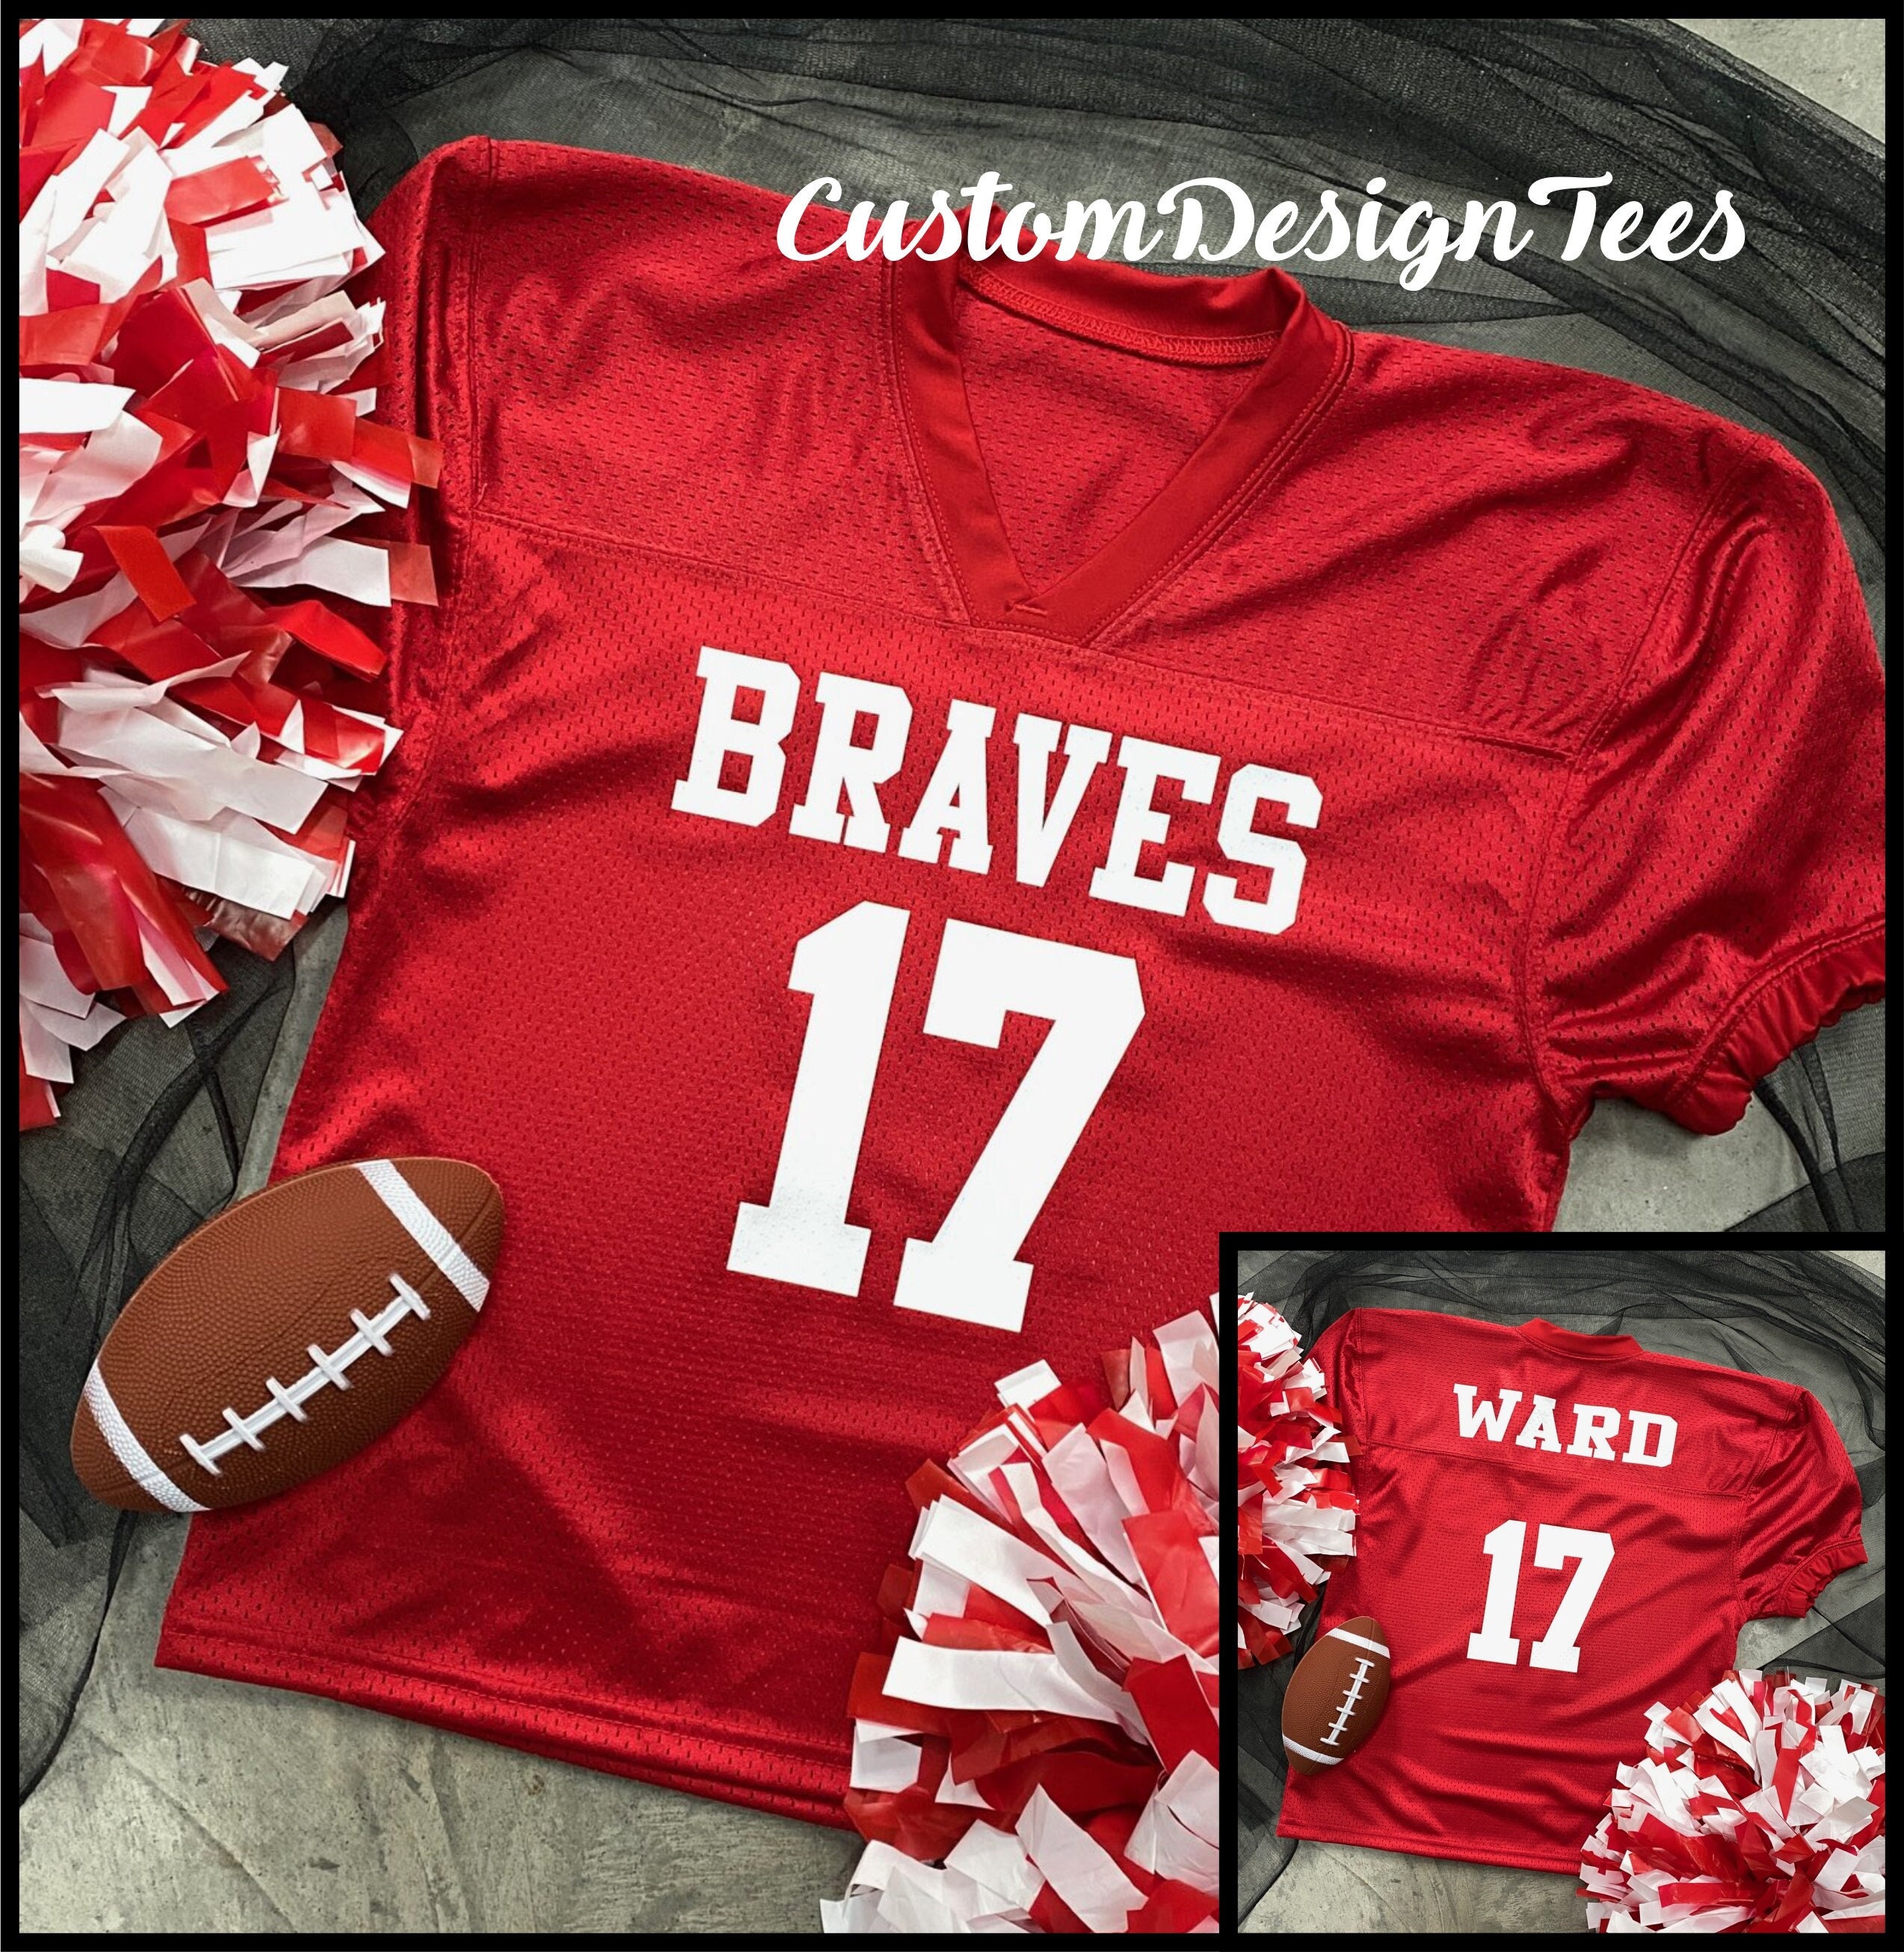 Source Stitched kids youth adult plain custom made American football  practice jersey uniforms wear with pants on m.